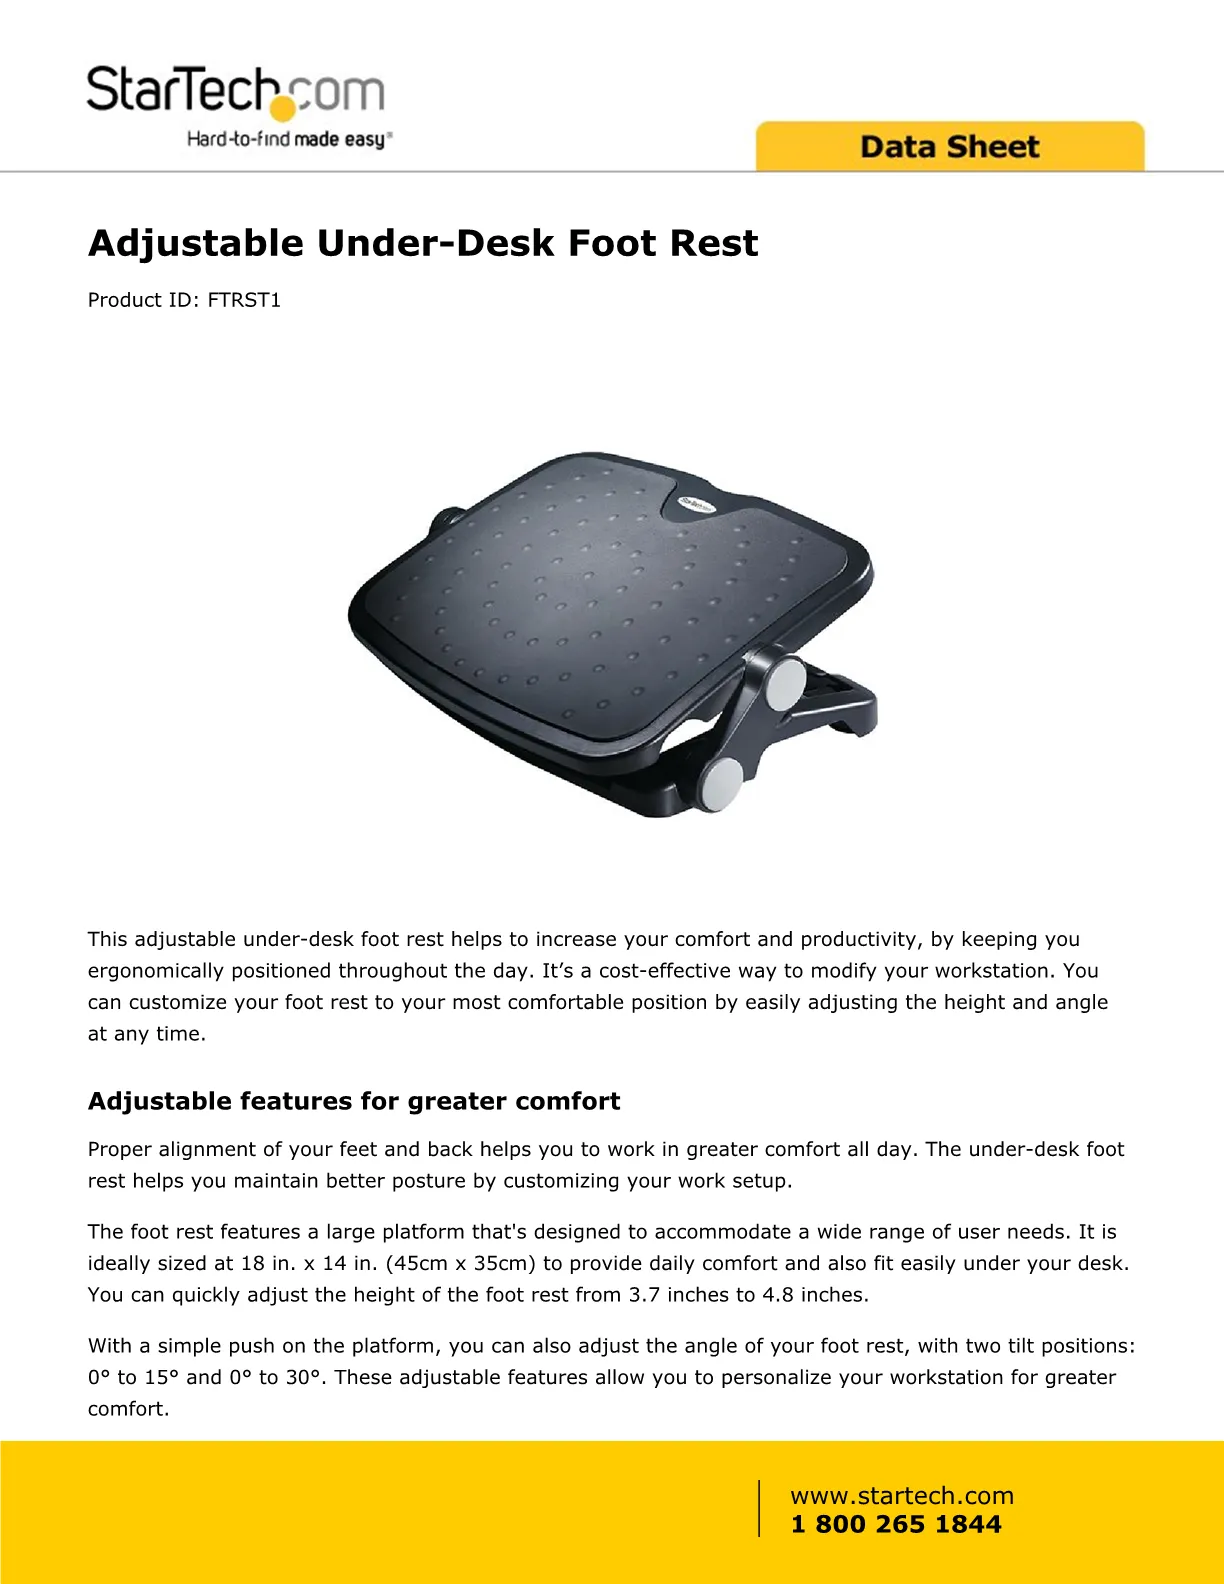 Startech.Com Under Desk Foot Rest 18In X 14In Adjustable Height and Angle  Foot Stool Footrest For Desk Office Foot Rest Ftrst1 